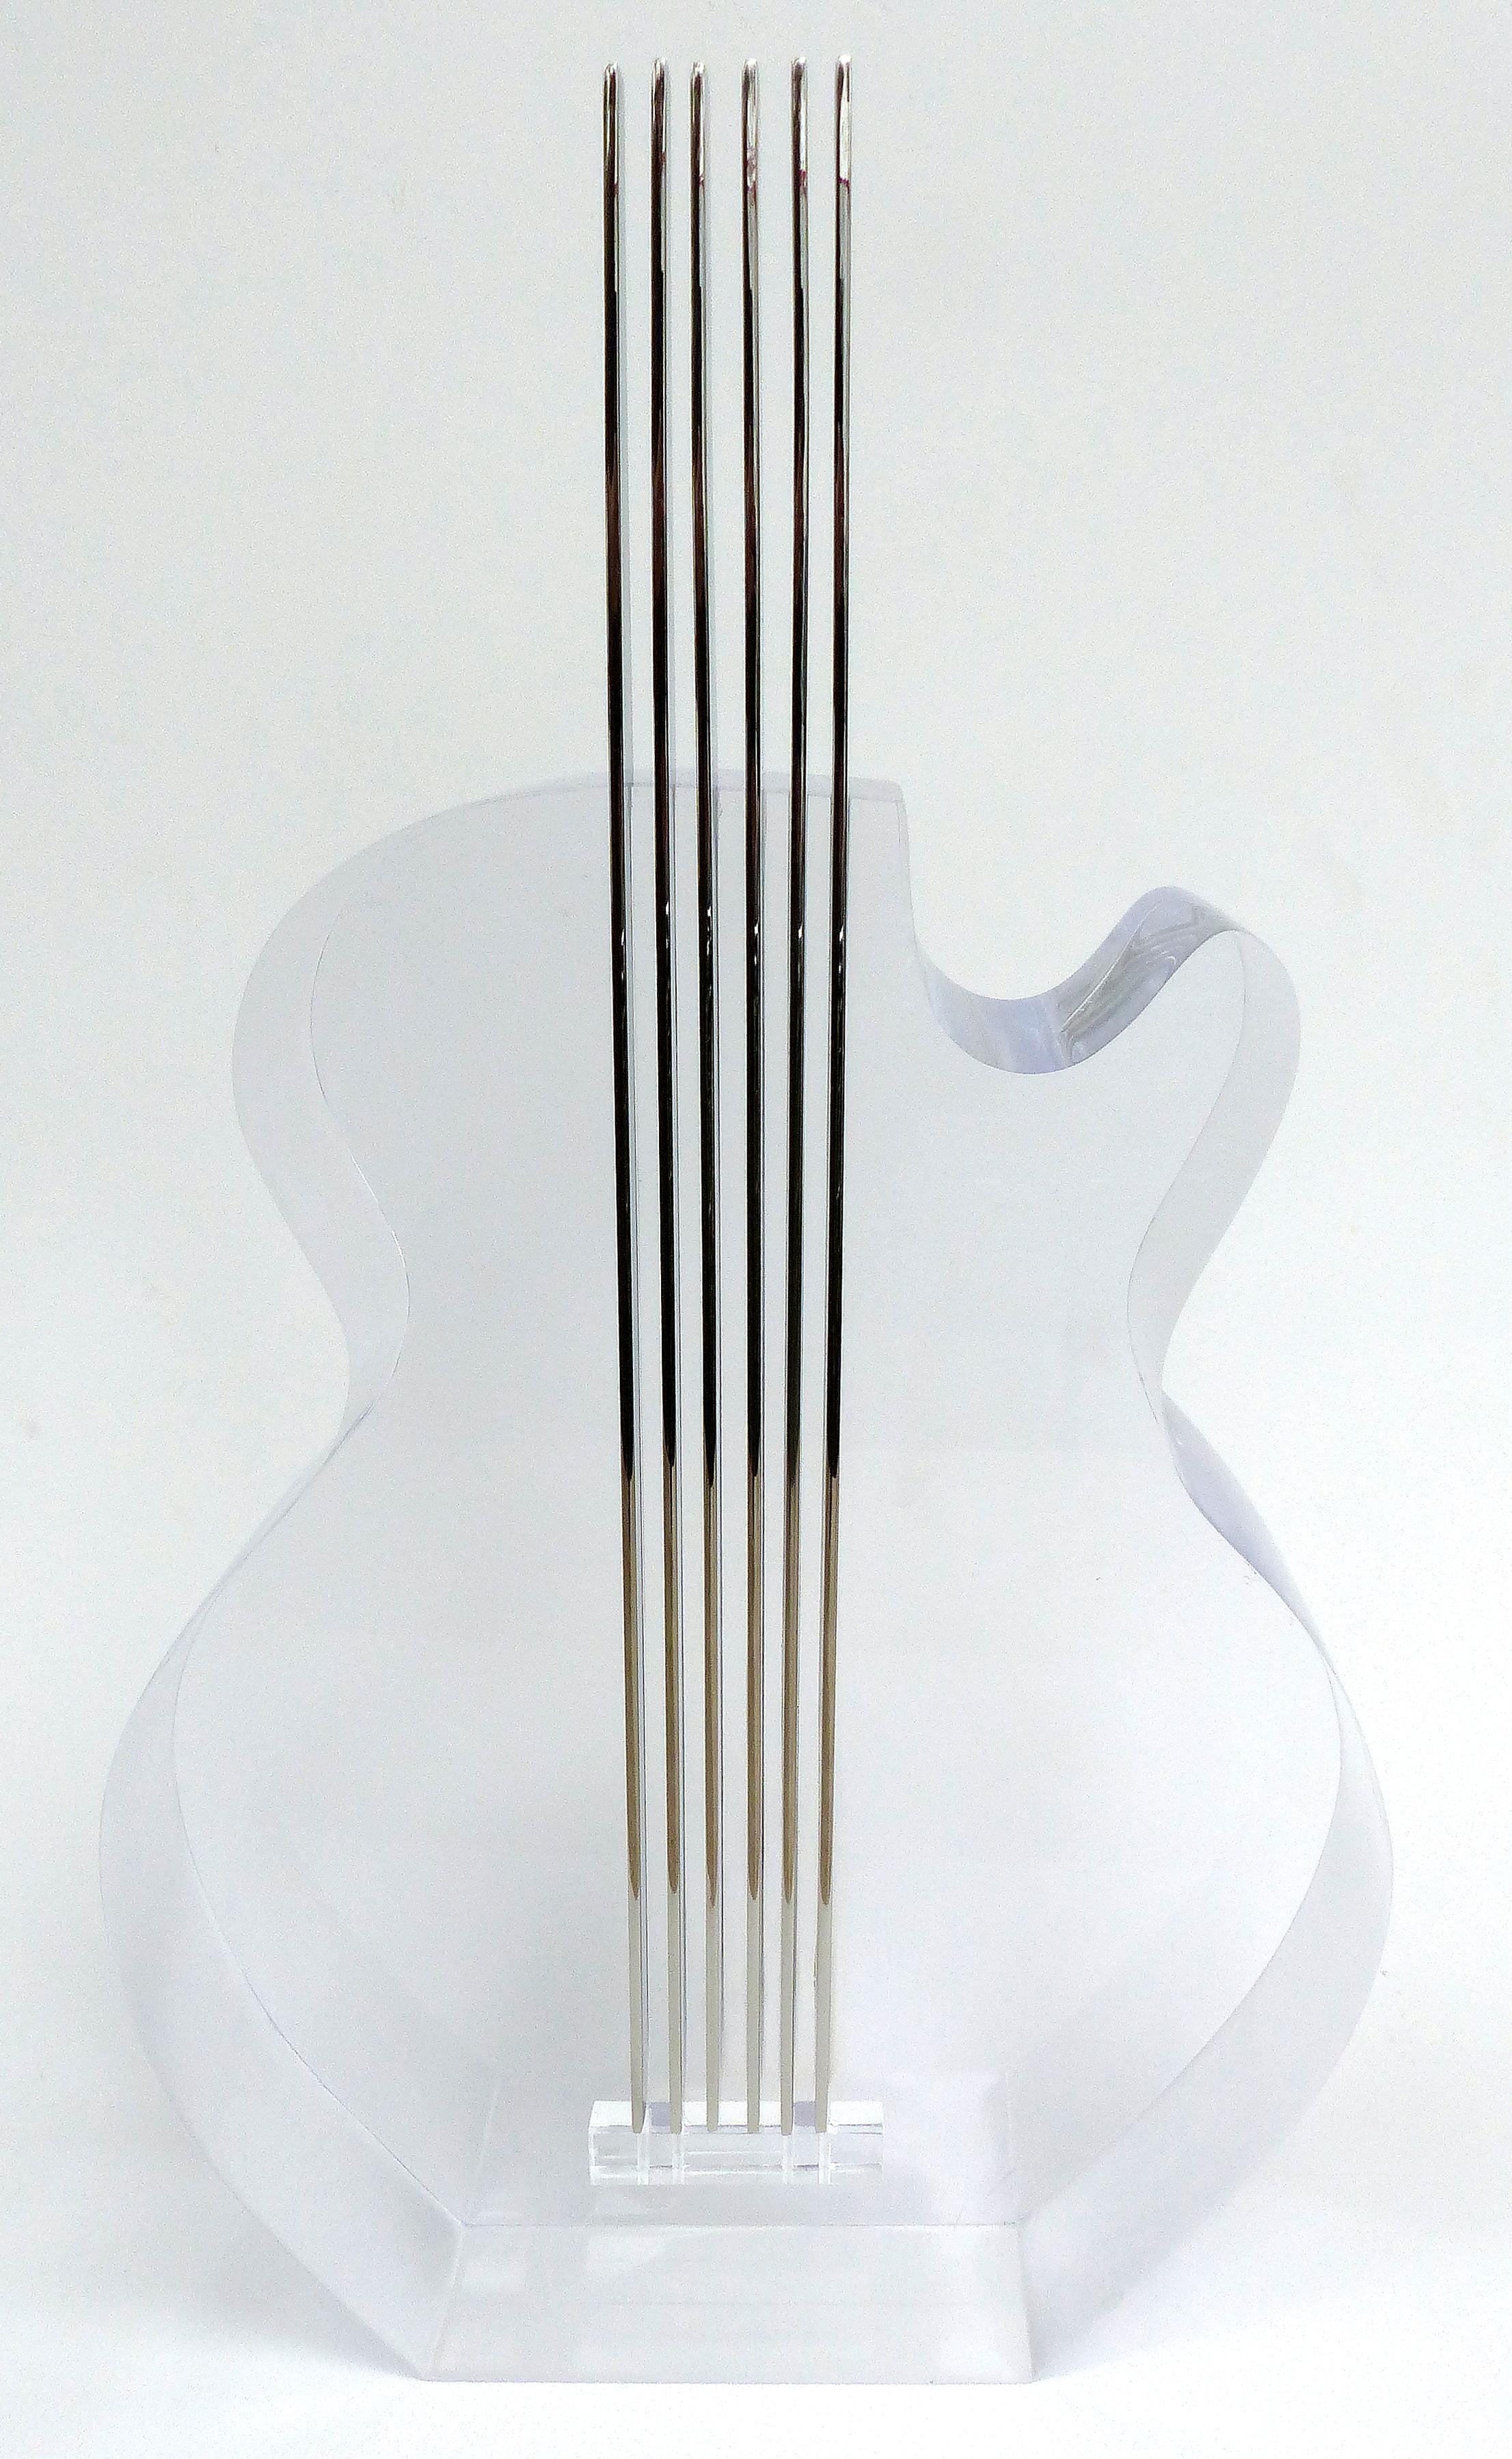 Custom Lucite and Stainless Steel Sculpture of a Guitar

Offered for sale is a Lucite and stainless steel sculpture of a guitar. This original sculpture is made of 4 inch thick Lucite. It is available in custom sizes and with variations. There are